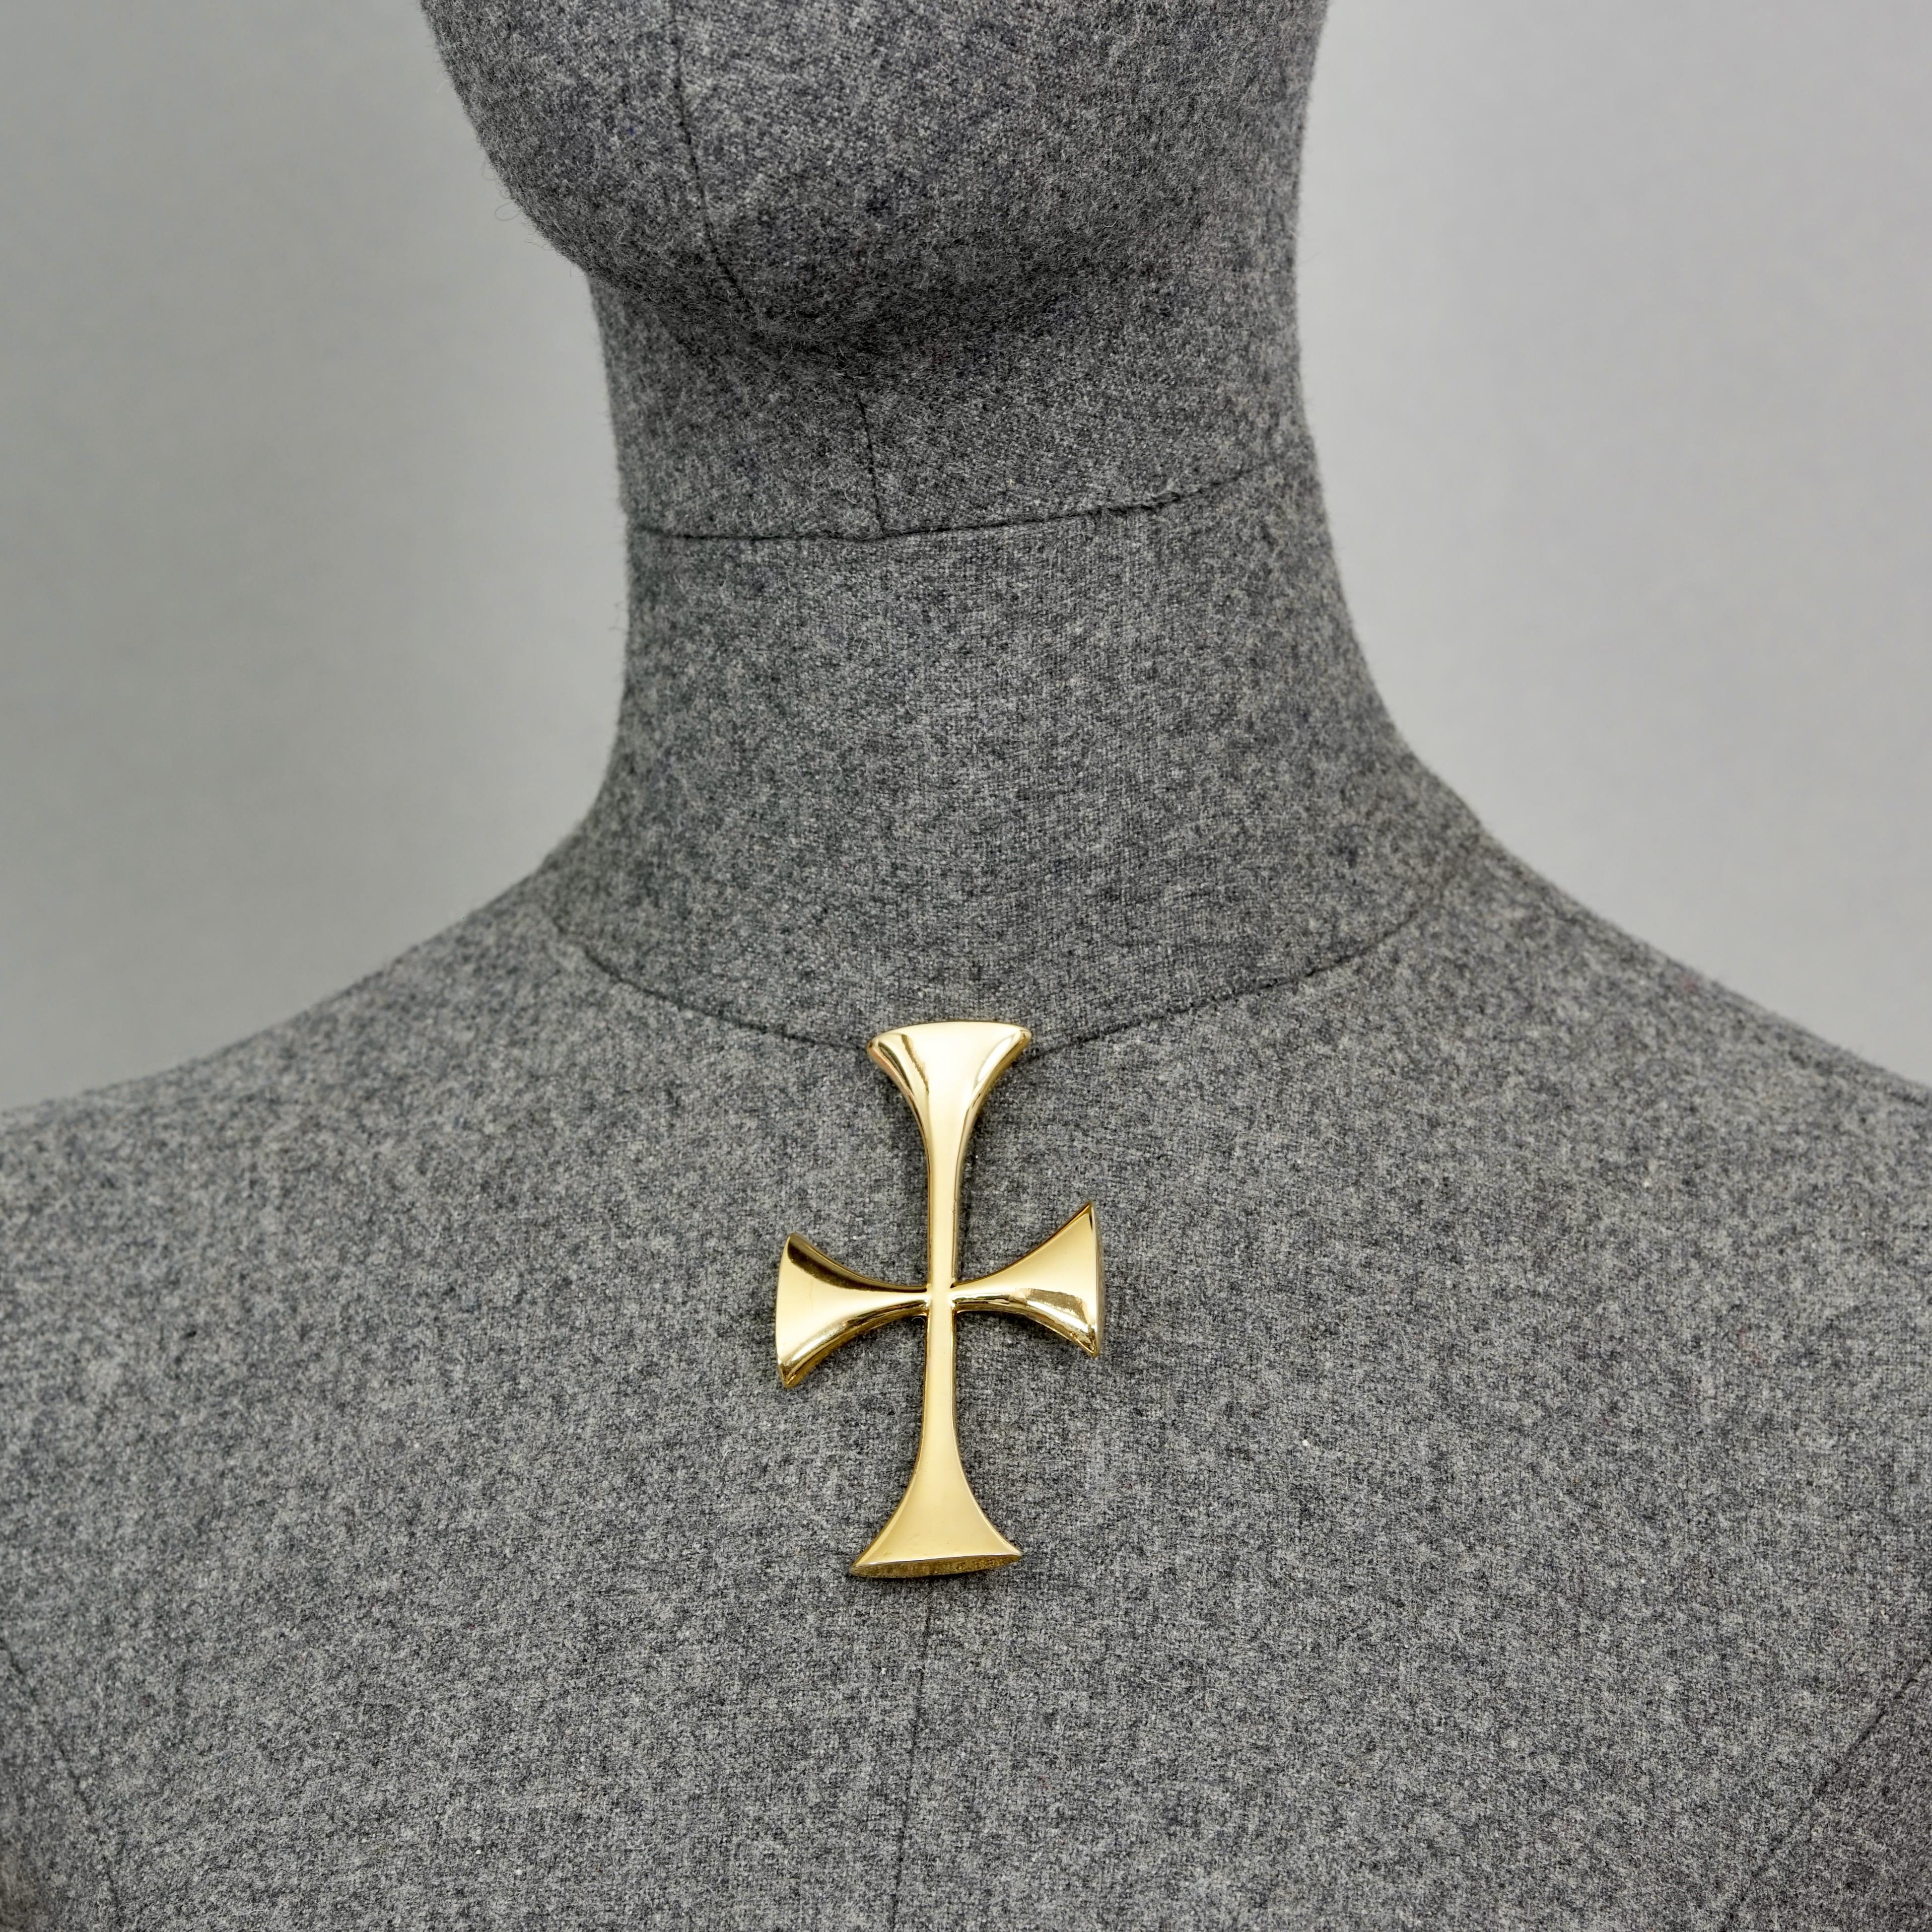 Vintage MOSCHINO Templar Cross Novelty Brooch

Measurements: 
Height: 3.15 inches (8 cm)
Width: 1.57 inches (4 cm)

Features:
- 100% Authentic MOSCHINO.
- Novelty templar cross brooch.
- Gold tone hardware.
- Signed MOSCHINO on reverse.